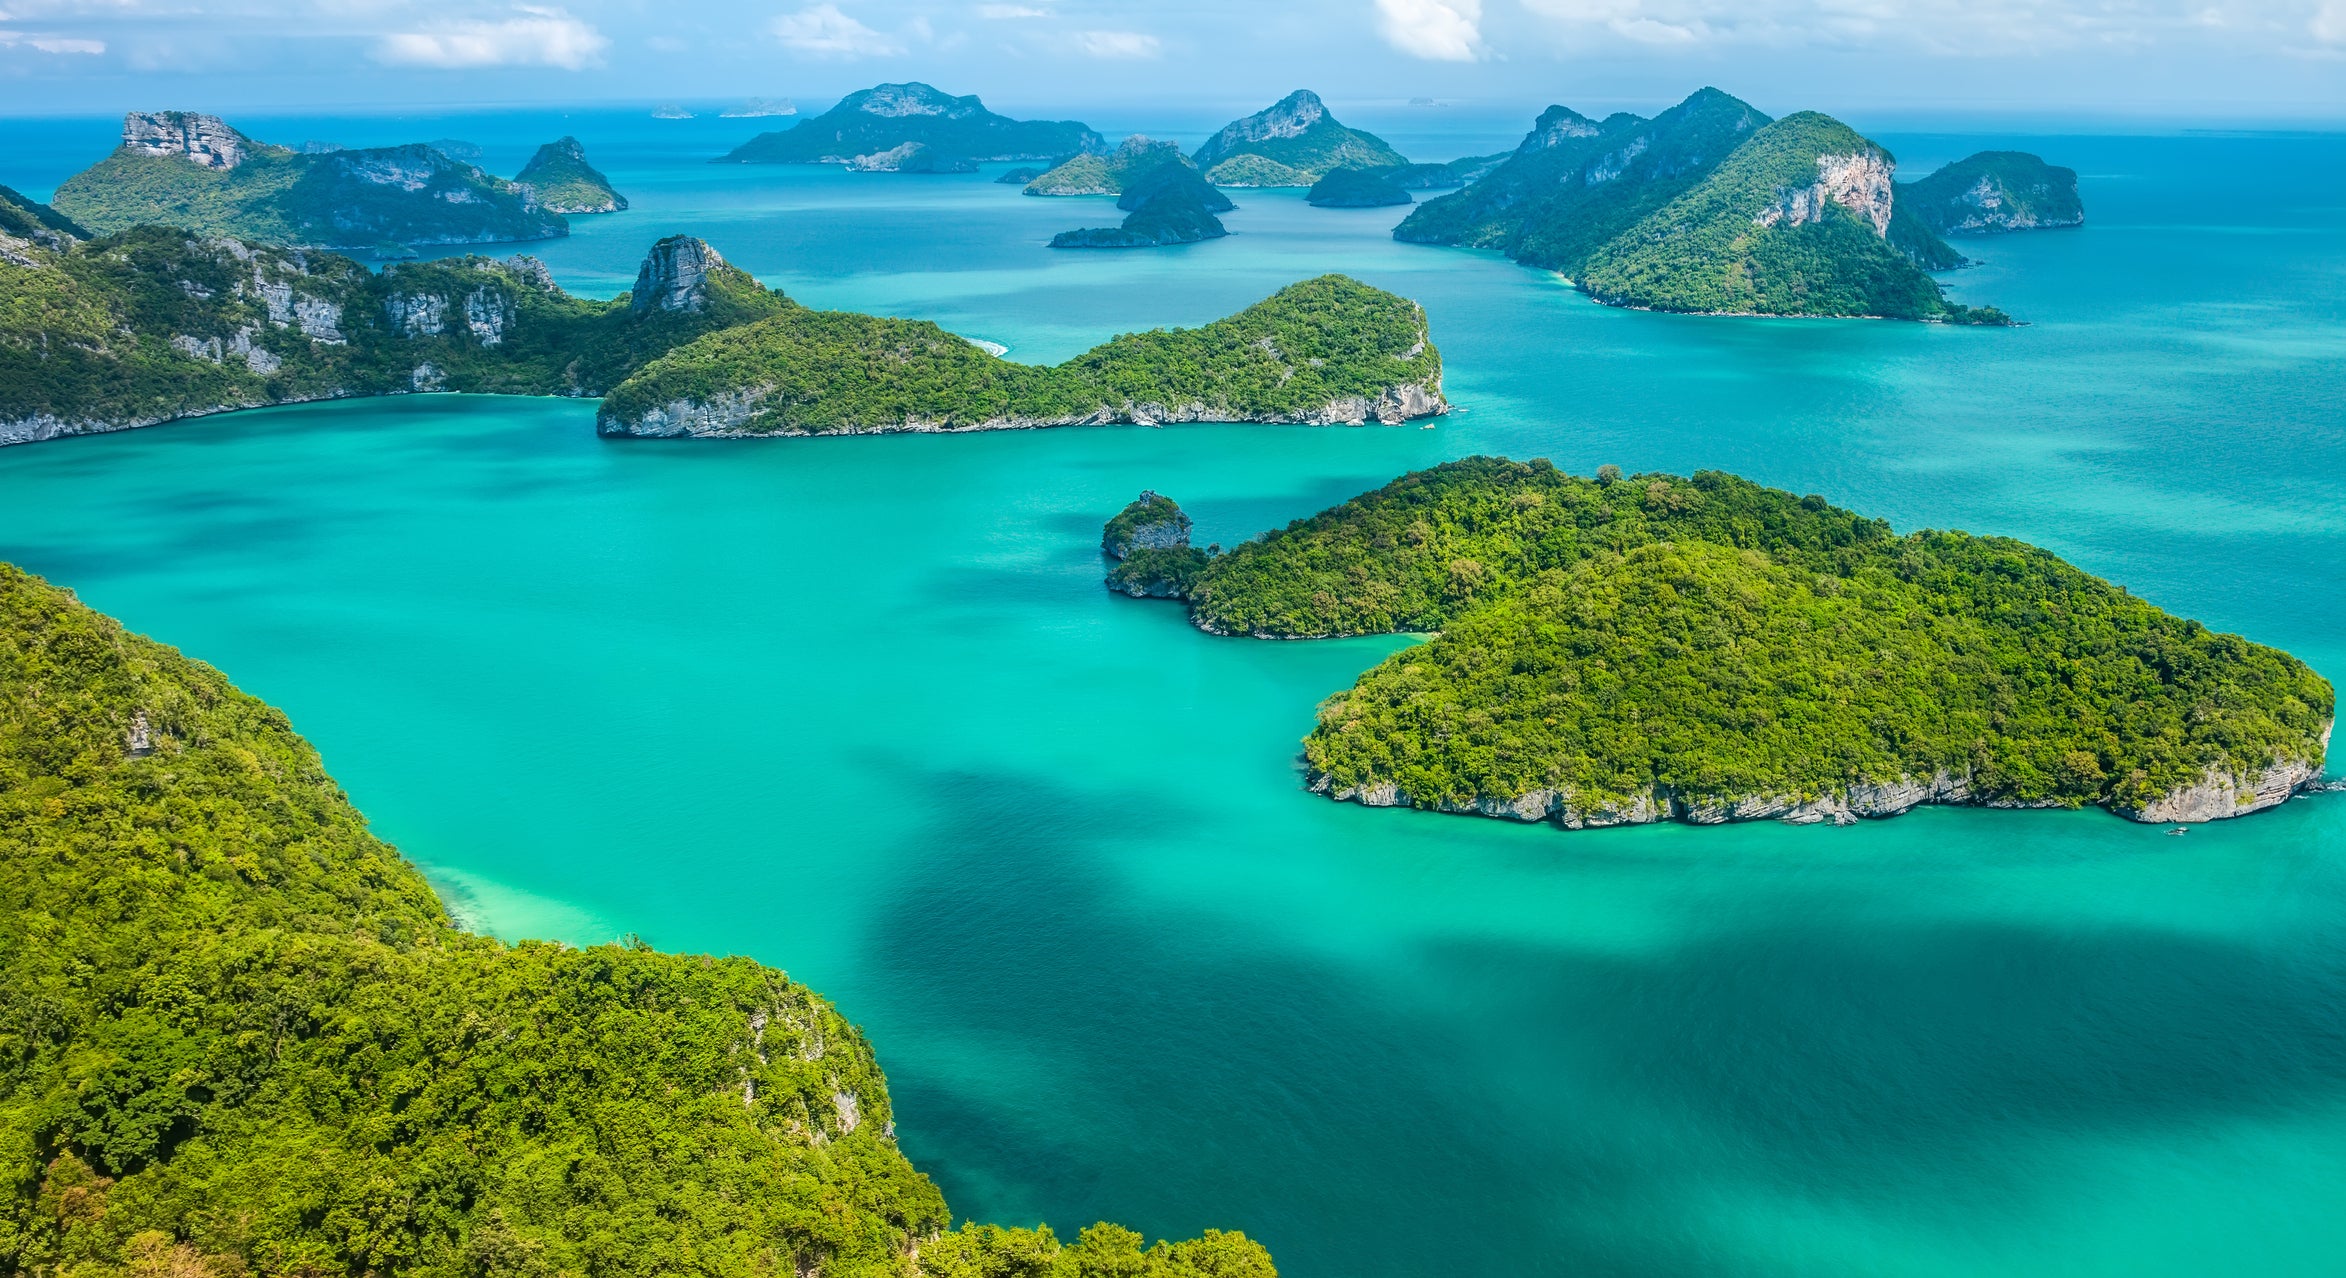 This Secret And Stunning Island Destination Is Only 30 Minutes